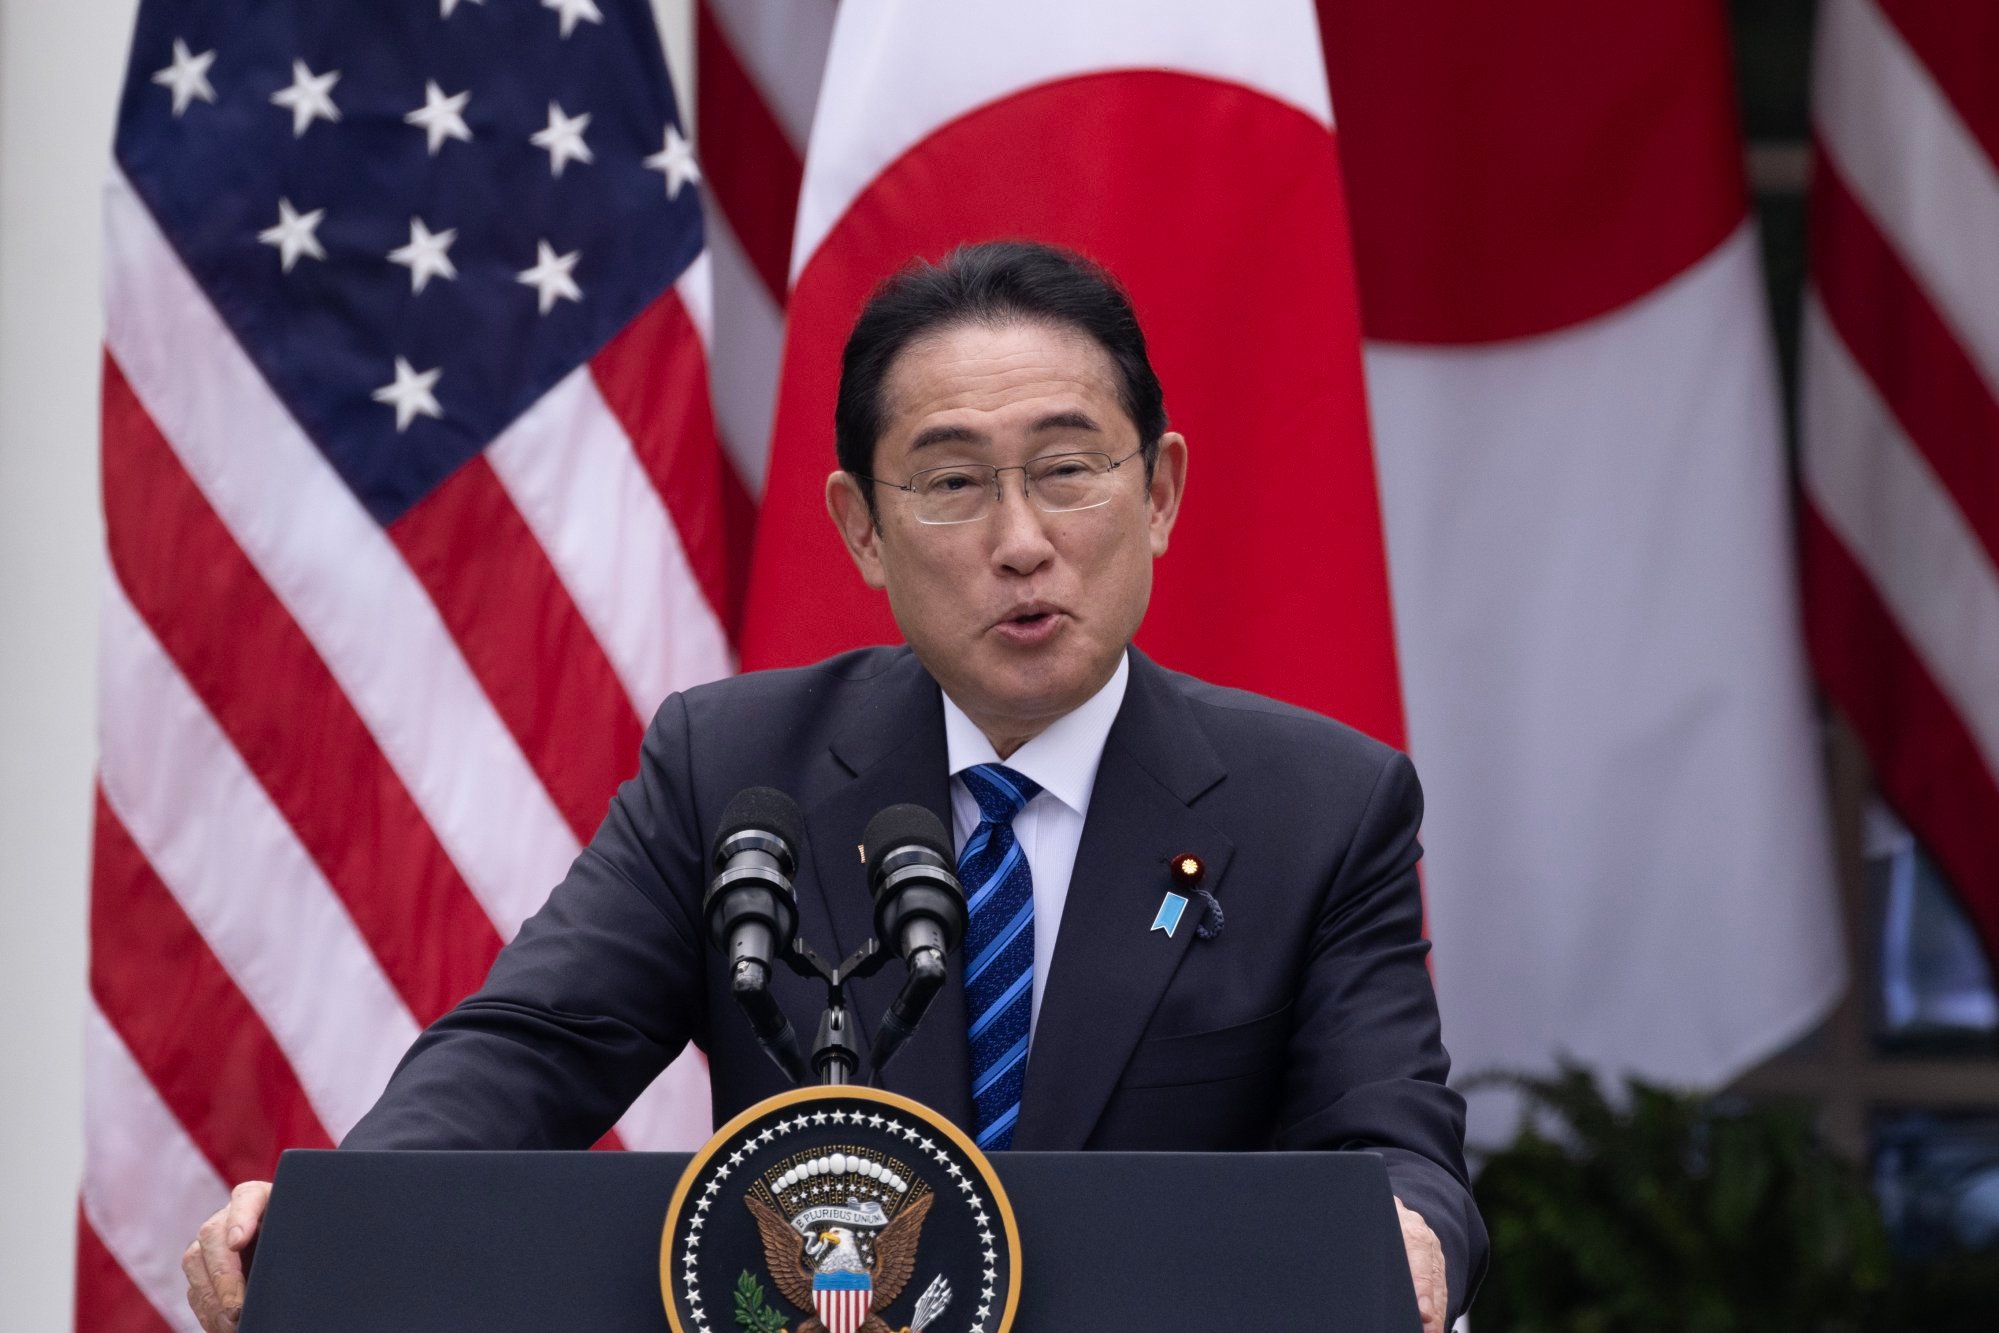 Fumio Kishida’s state visit to the White House is the first by a Japanese prime minister in nine years. Photo: EPA-EFE